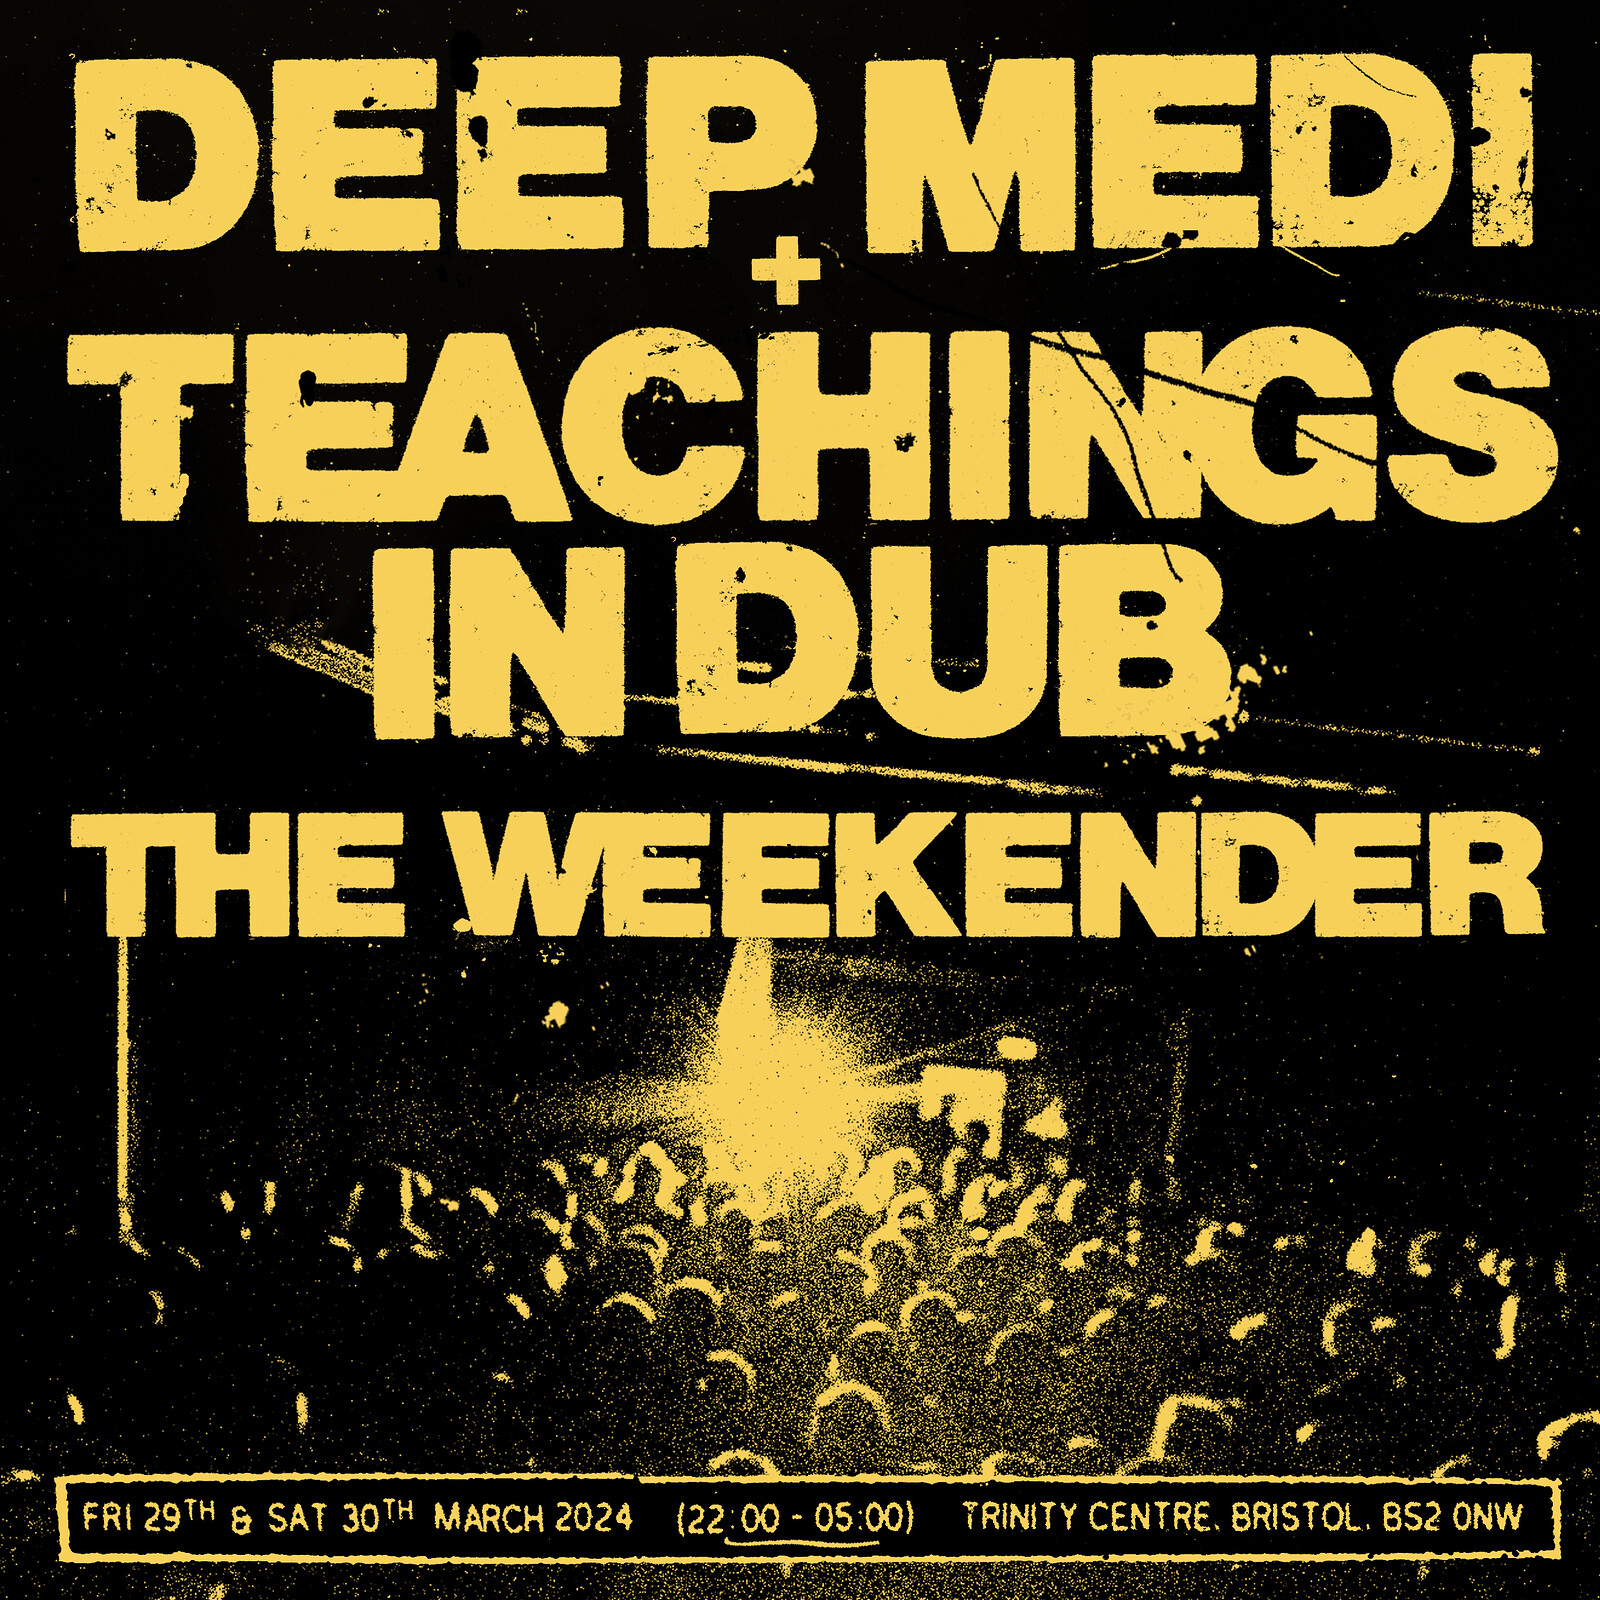 The Weekender : Friday x DEEP MEDi at The Trinity Centre